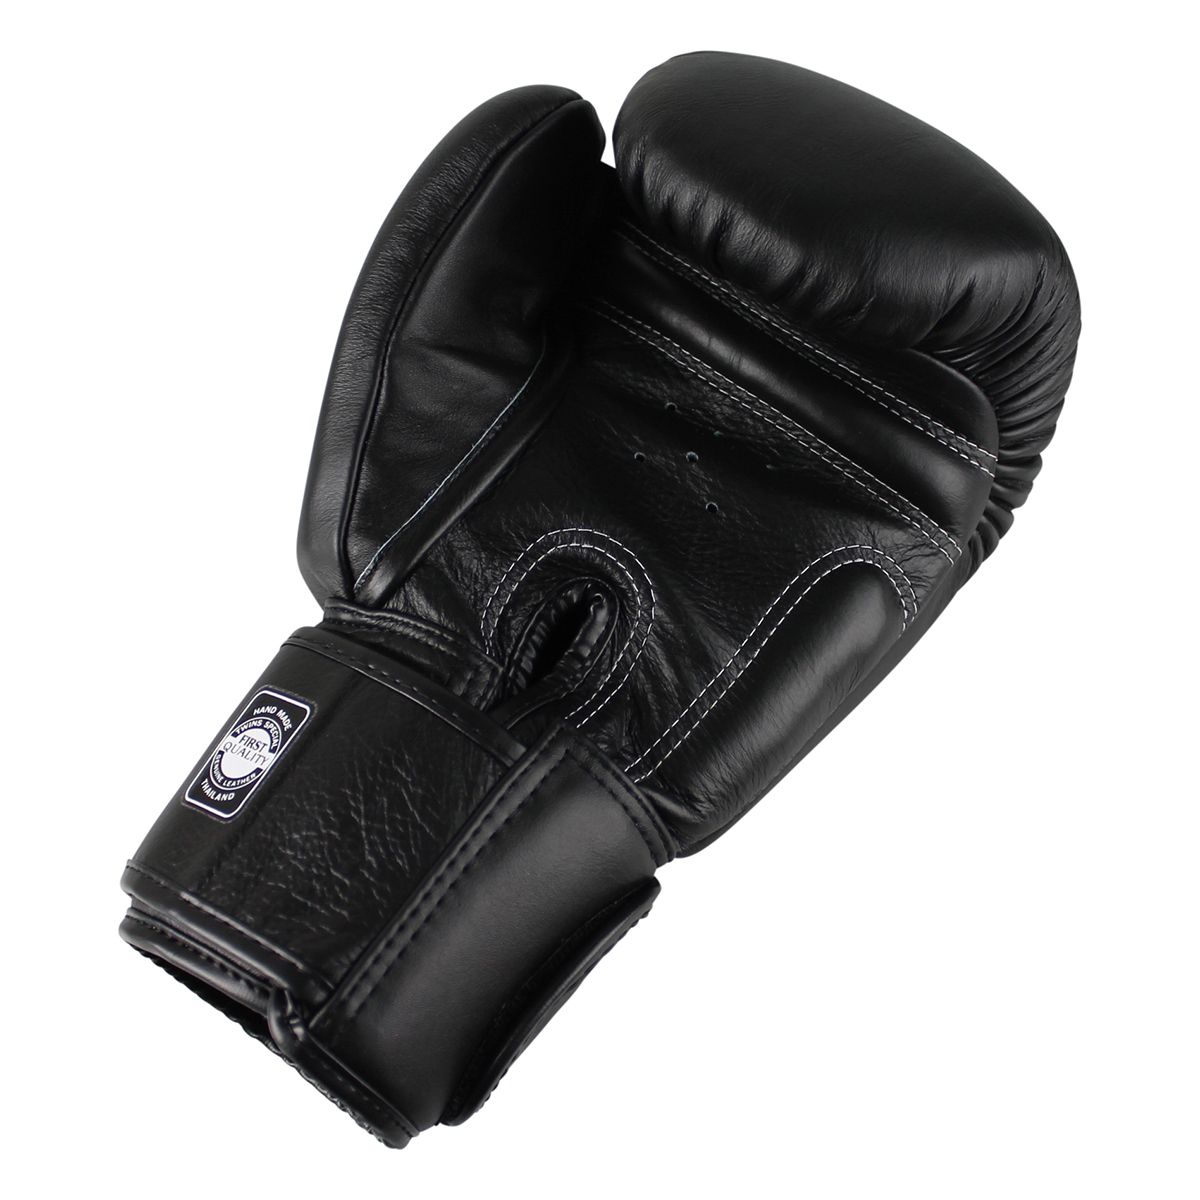 Twins Special BGVL3 Black Boxing Gloves